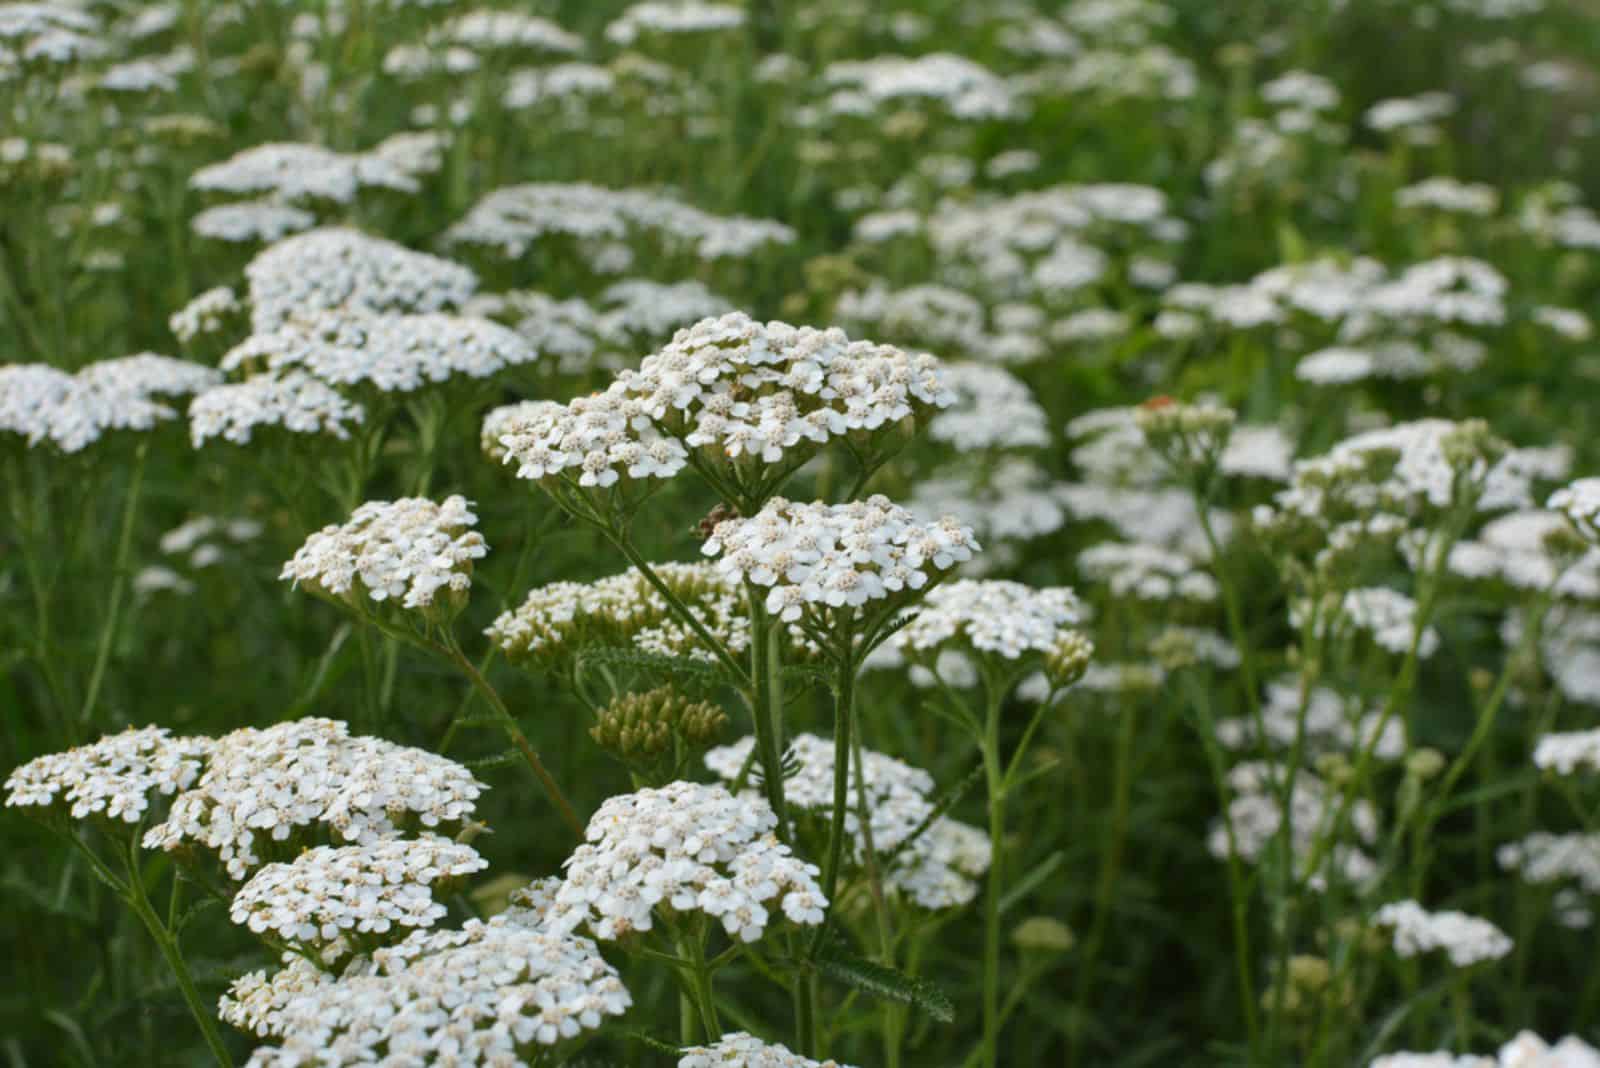 Yarrow (Achillea) blooms in the wild among grasses